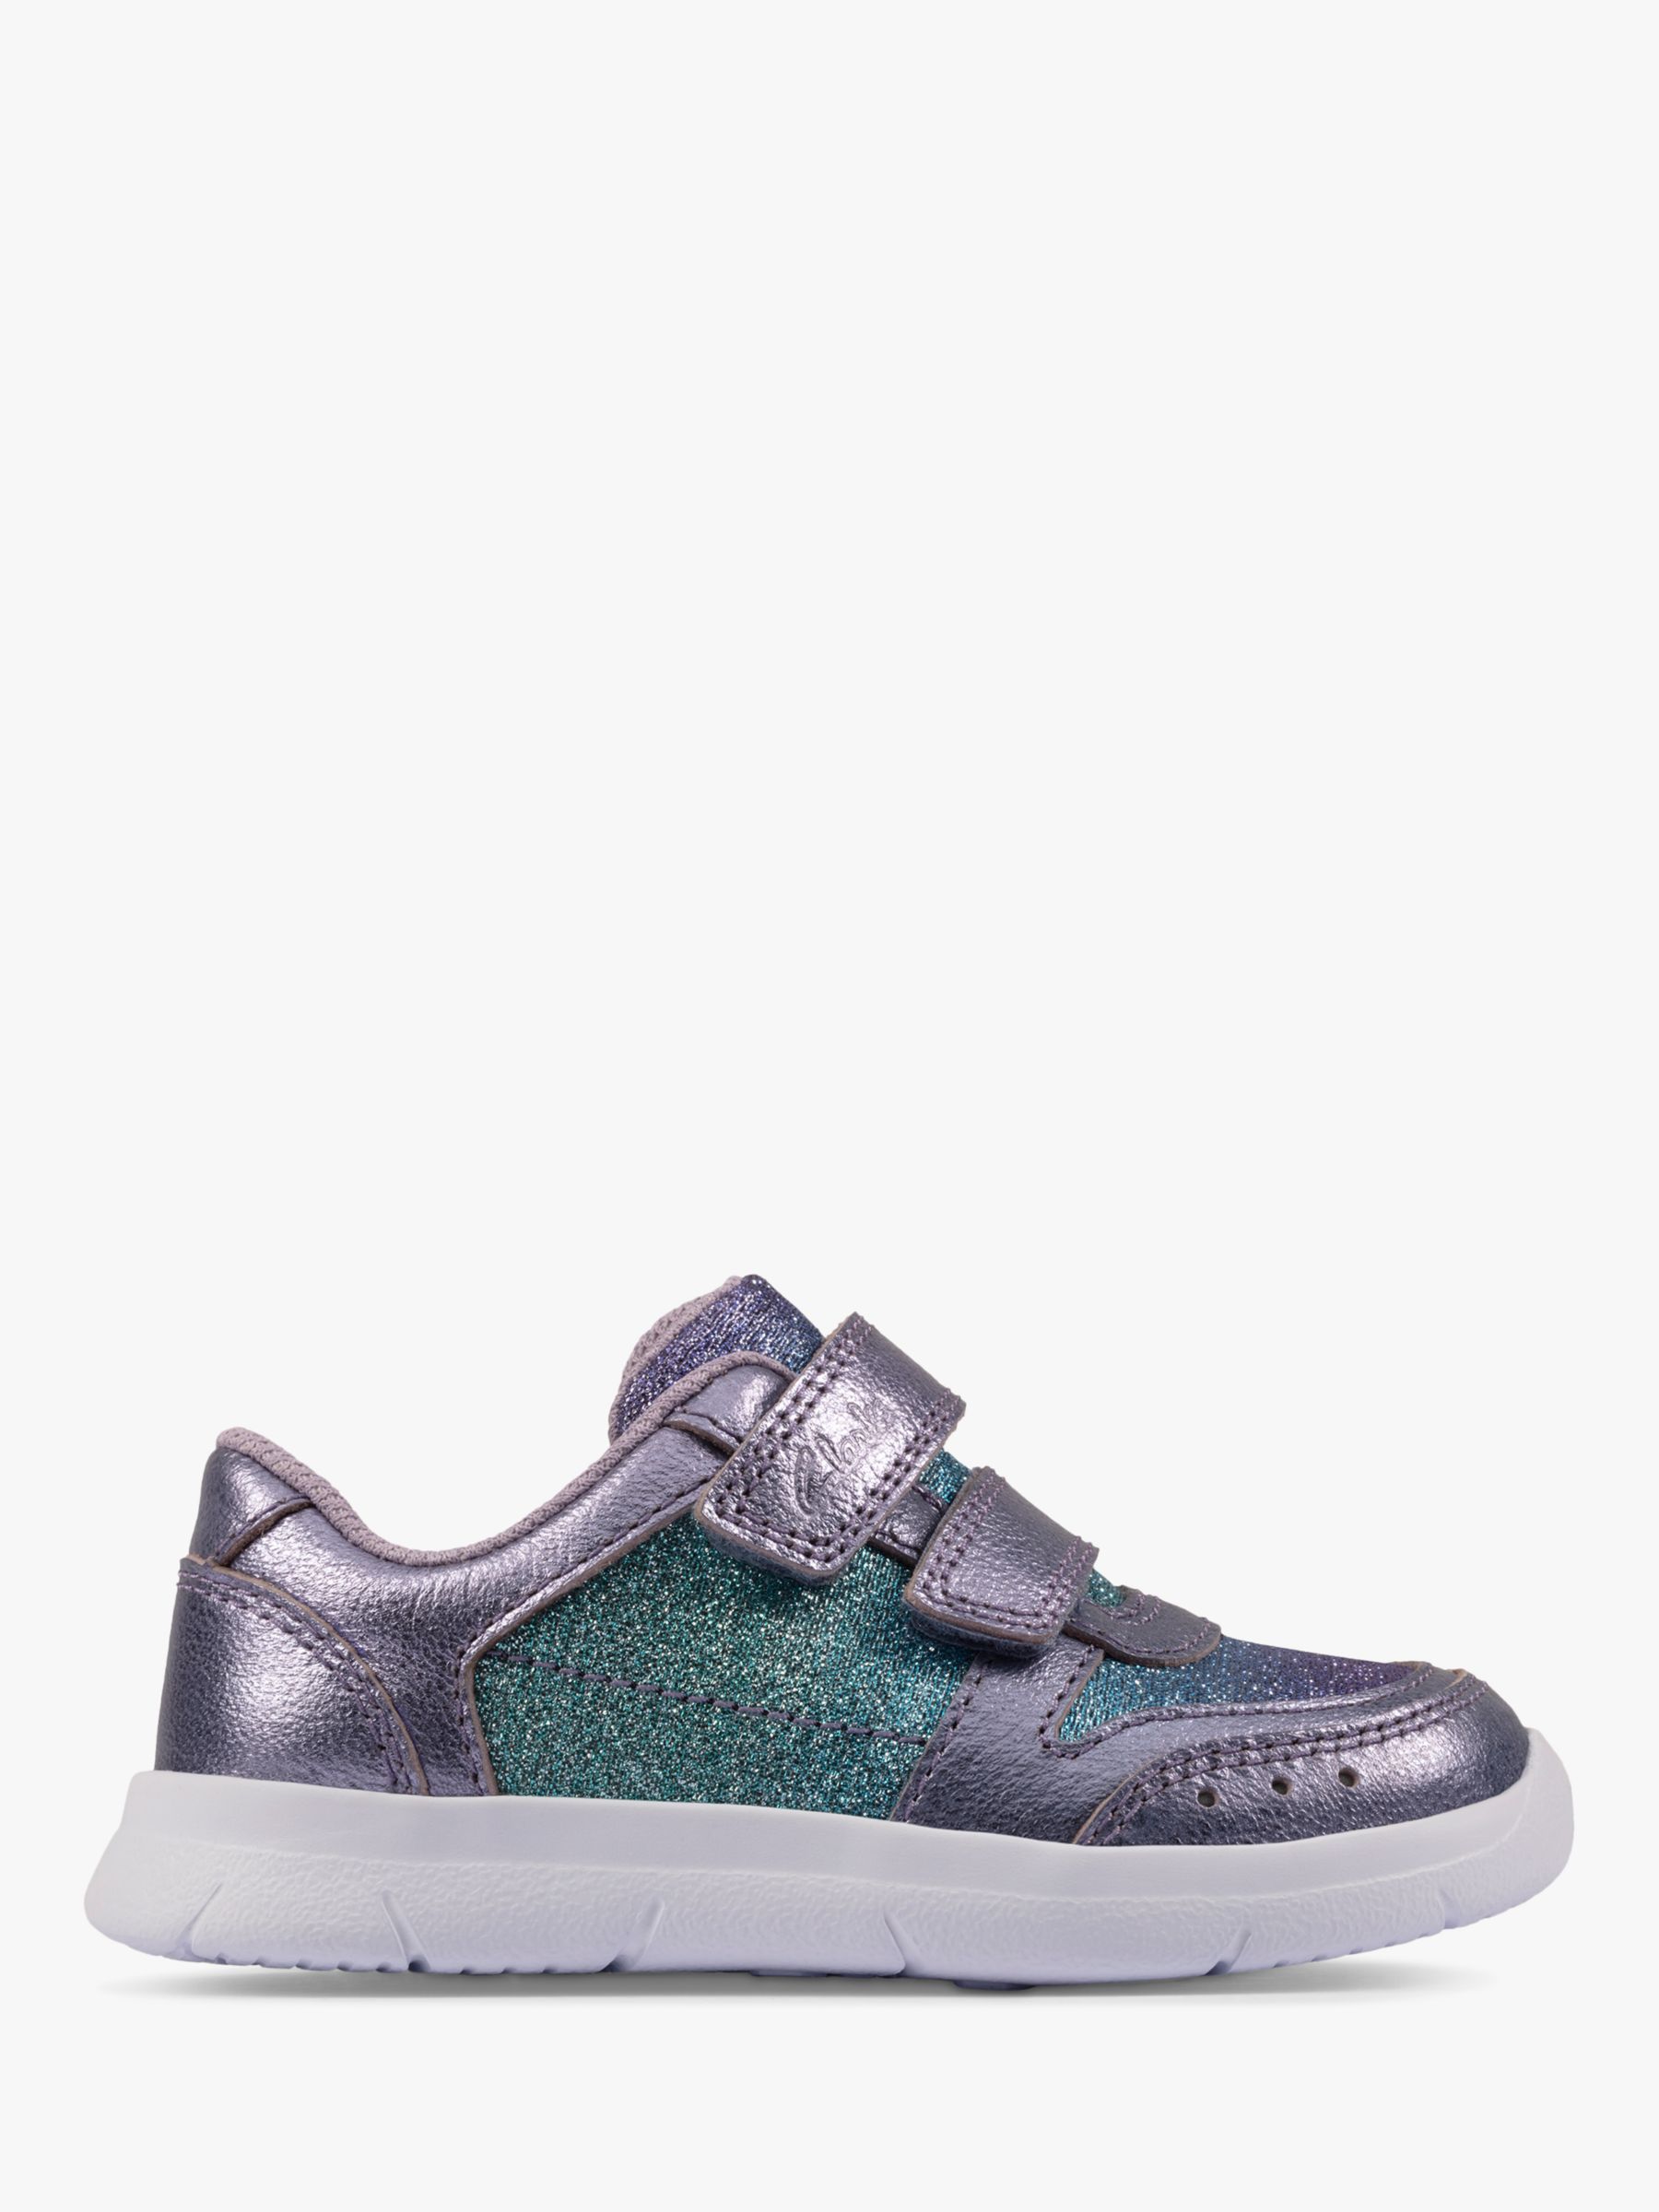 Clarks Kids' Ath Sonar Riptape Trainers, Lilac Leather